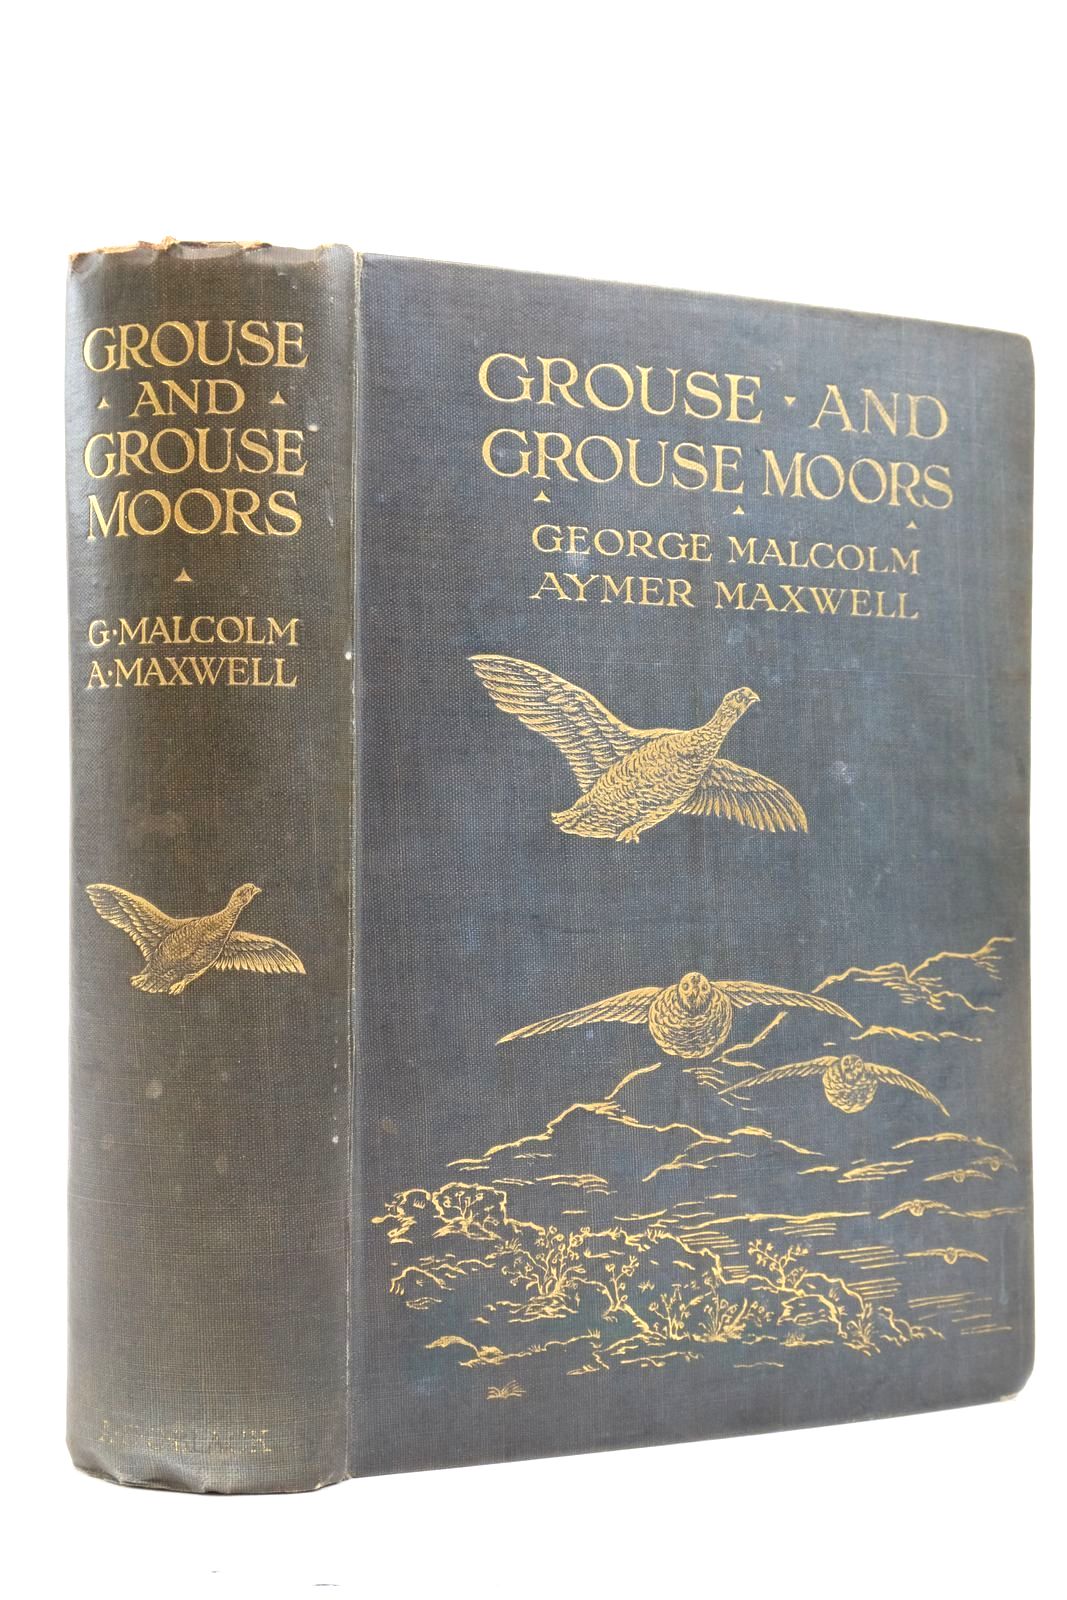 Photo of GROUSE AND GROUSE MOORS written by Malcolm, George Maxwell, Aymer illustrated by Whymper, Charles published by Adam &amp; Charles Black (STOCK CODE: 2137464)  for sale by Stella & Rose's Books